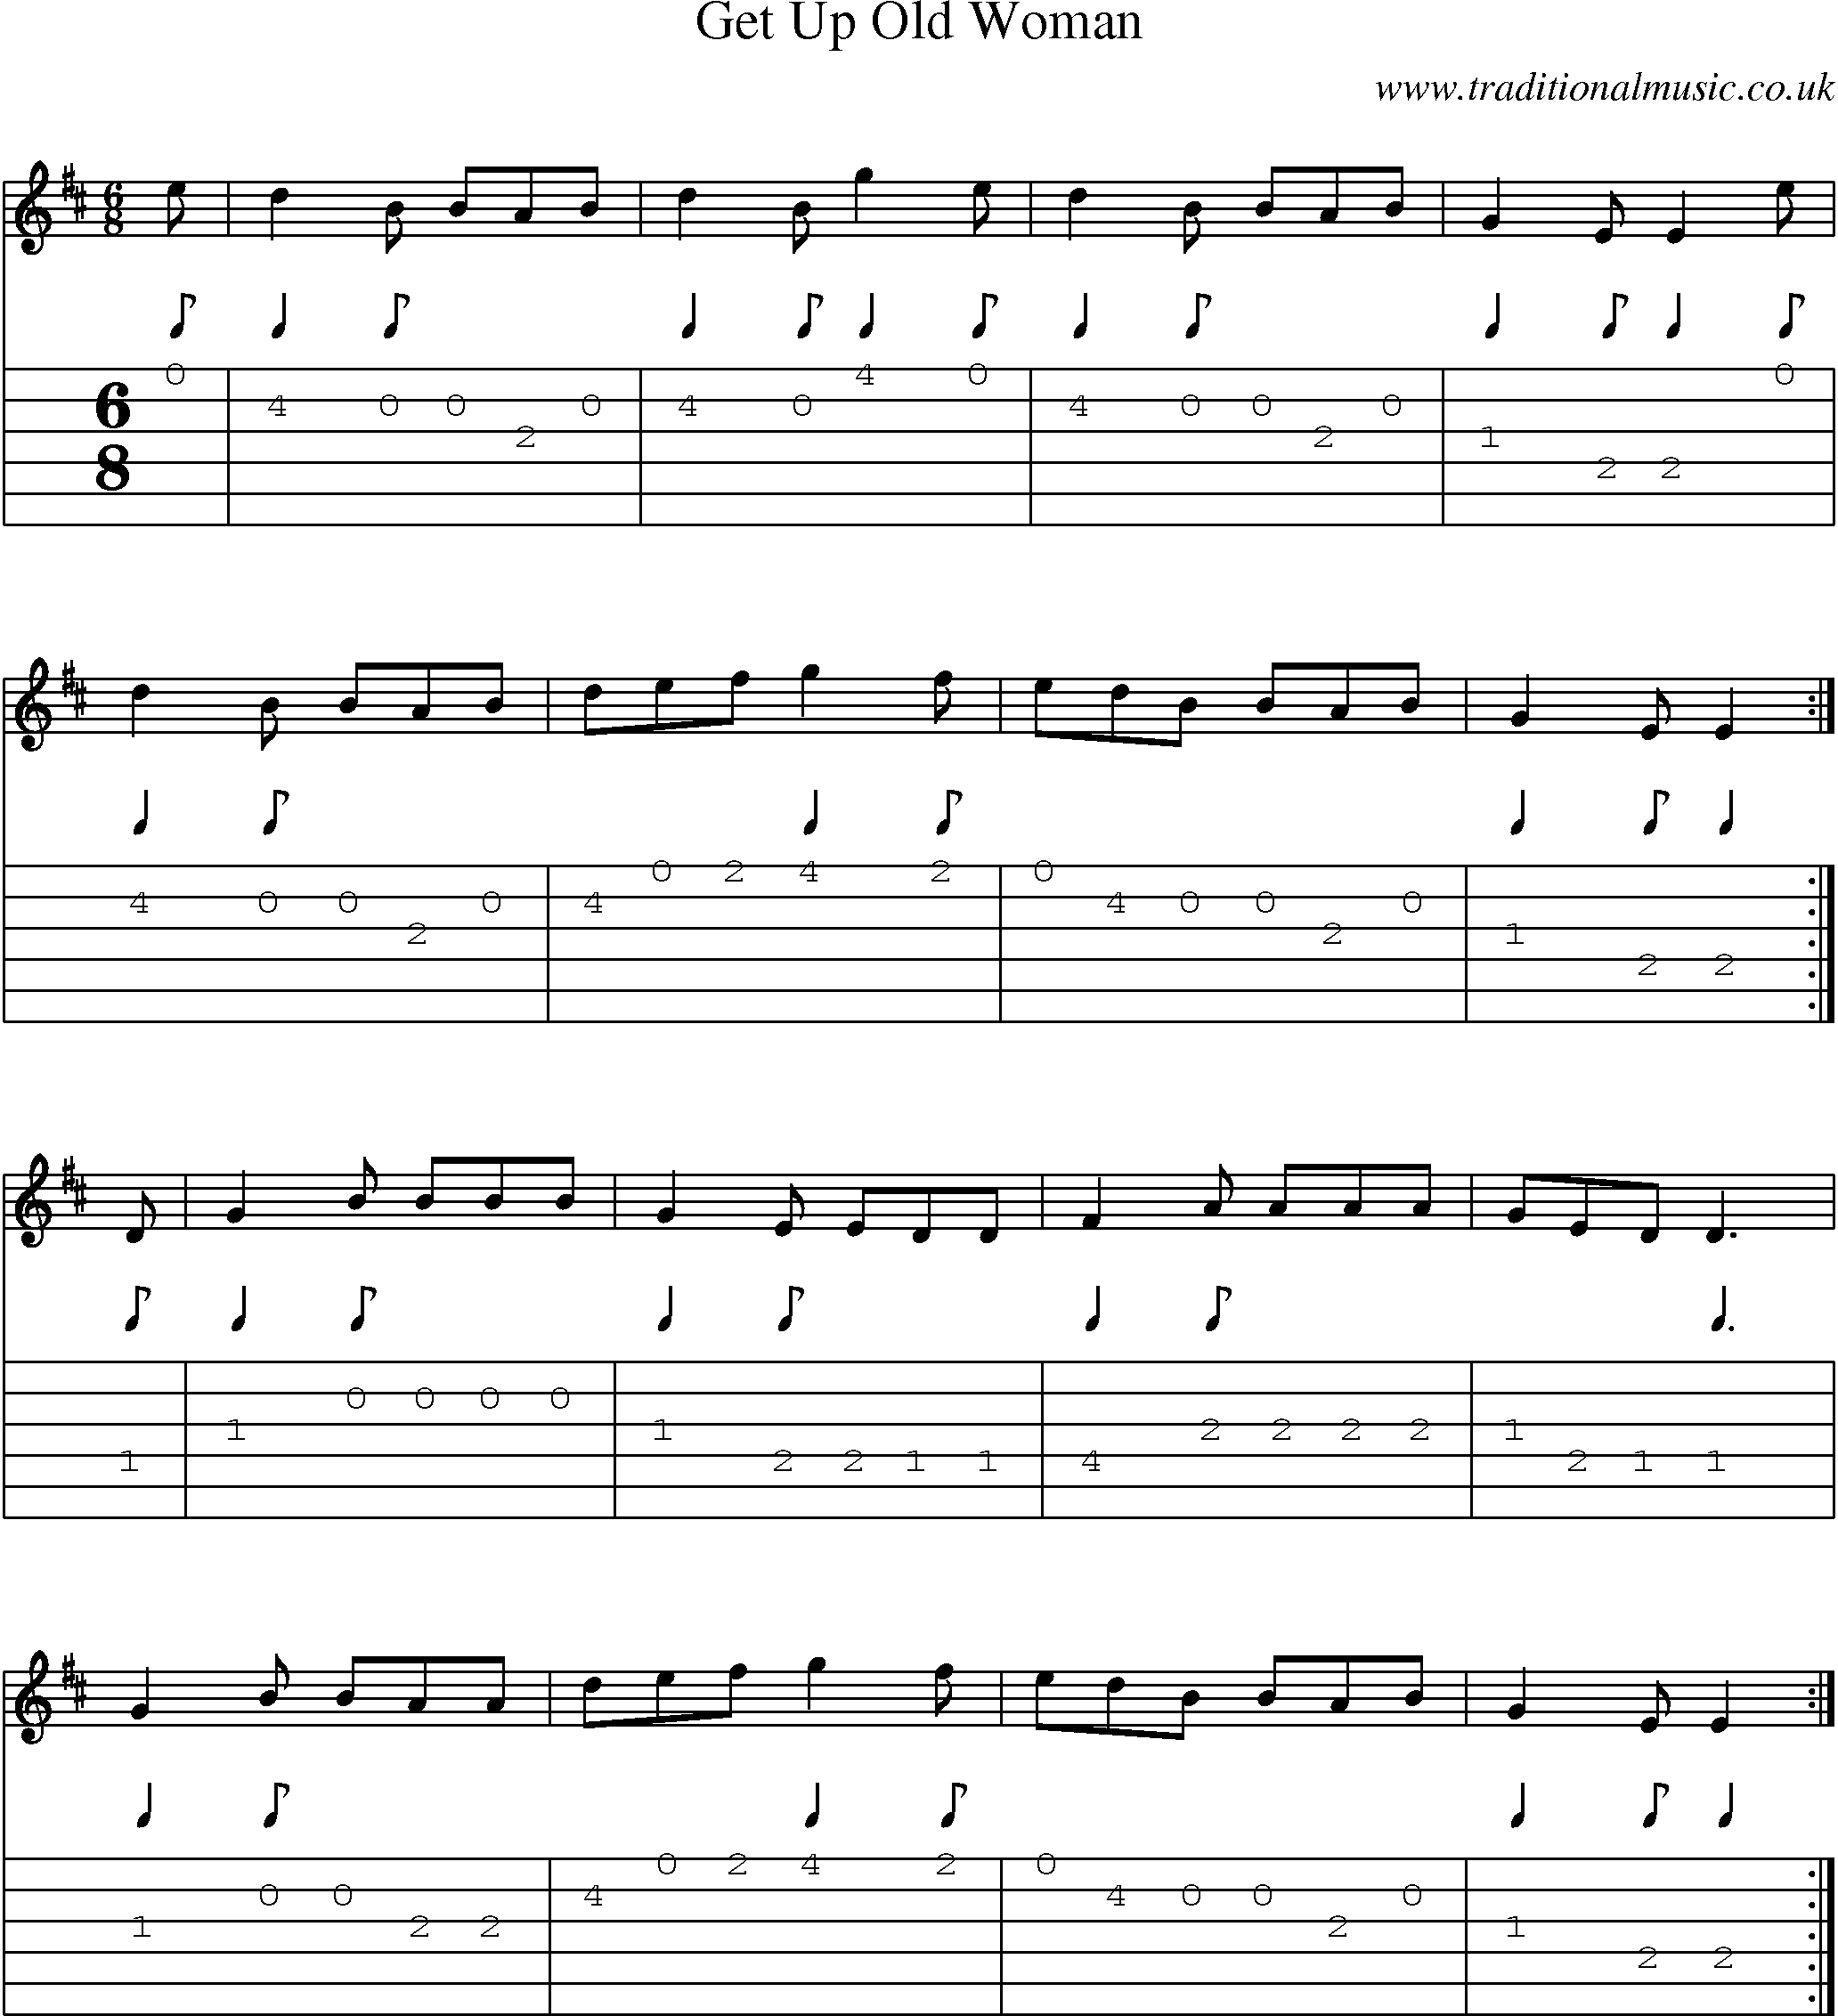 Music Score and Guitar Tabs for Get Up Old Woman